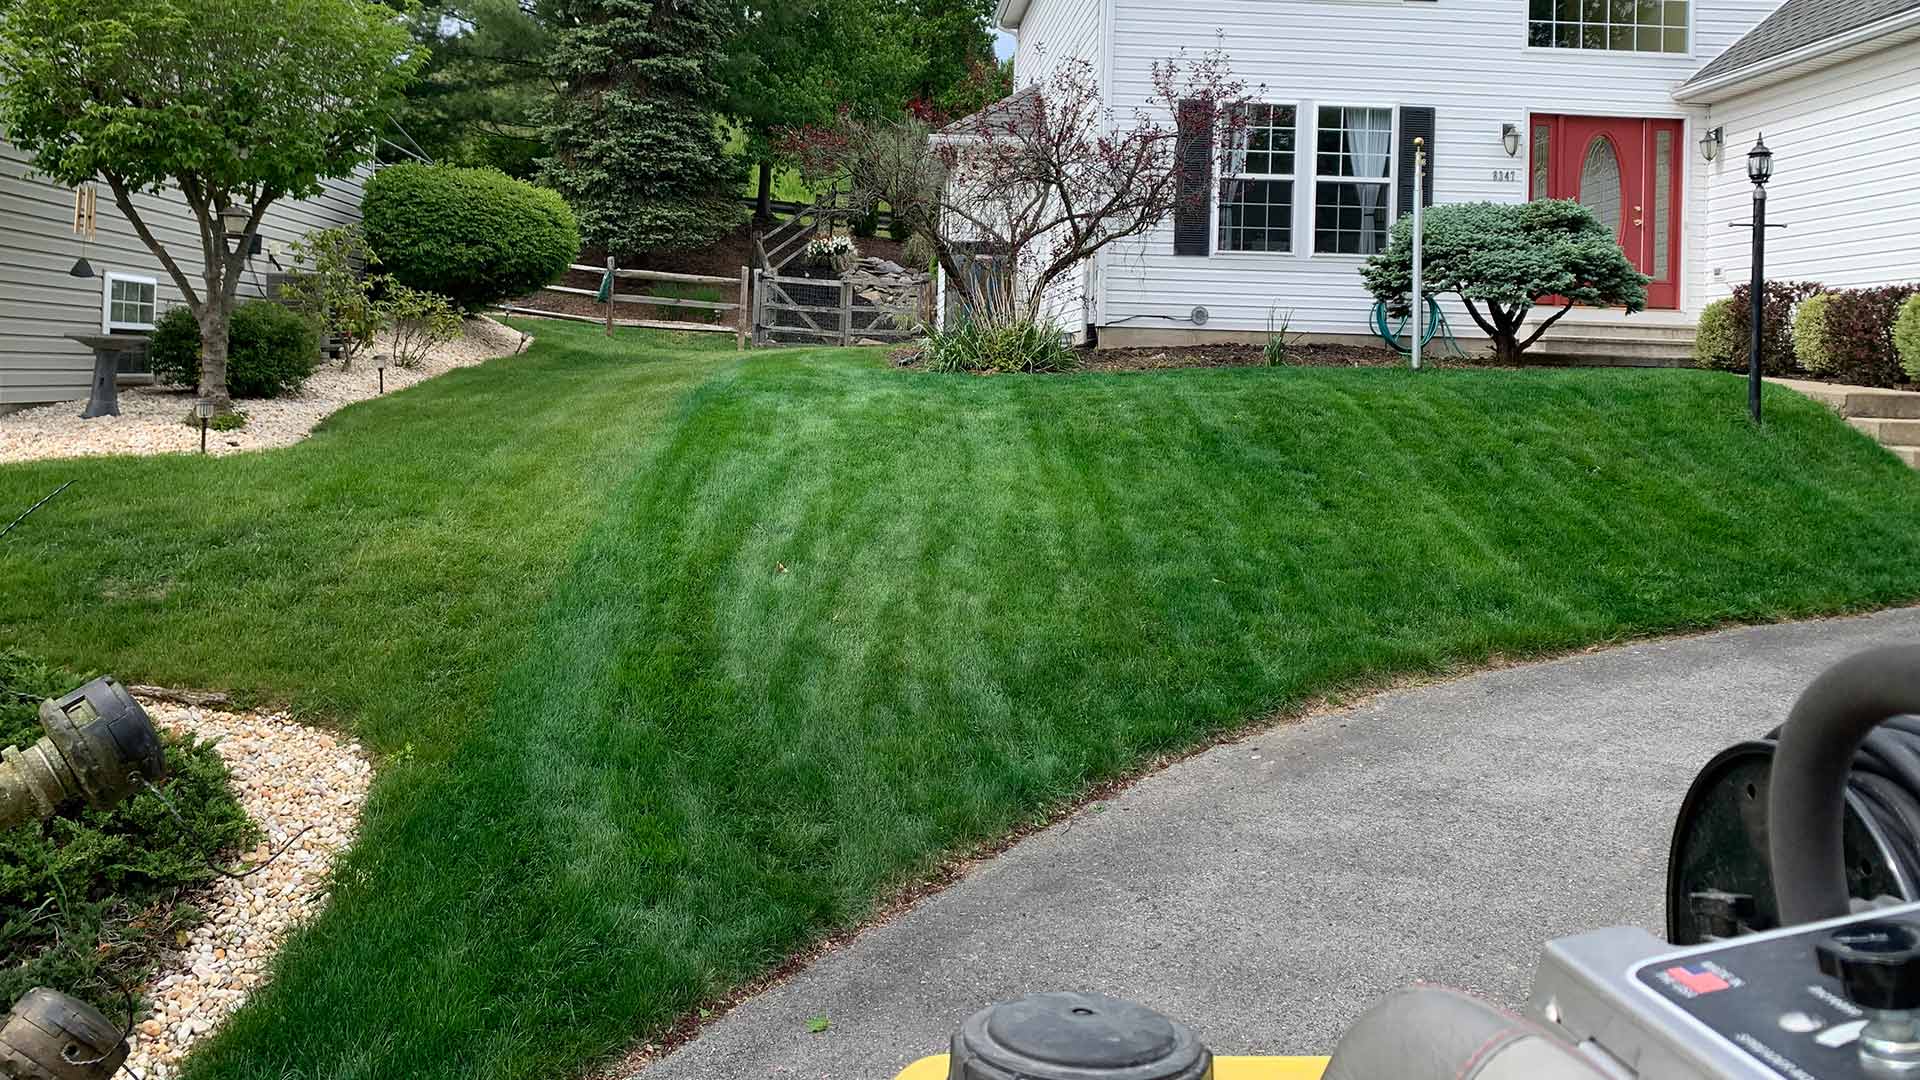 An Emmaus, Pennsylvania home lawn with regular lawn care services.